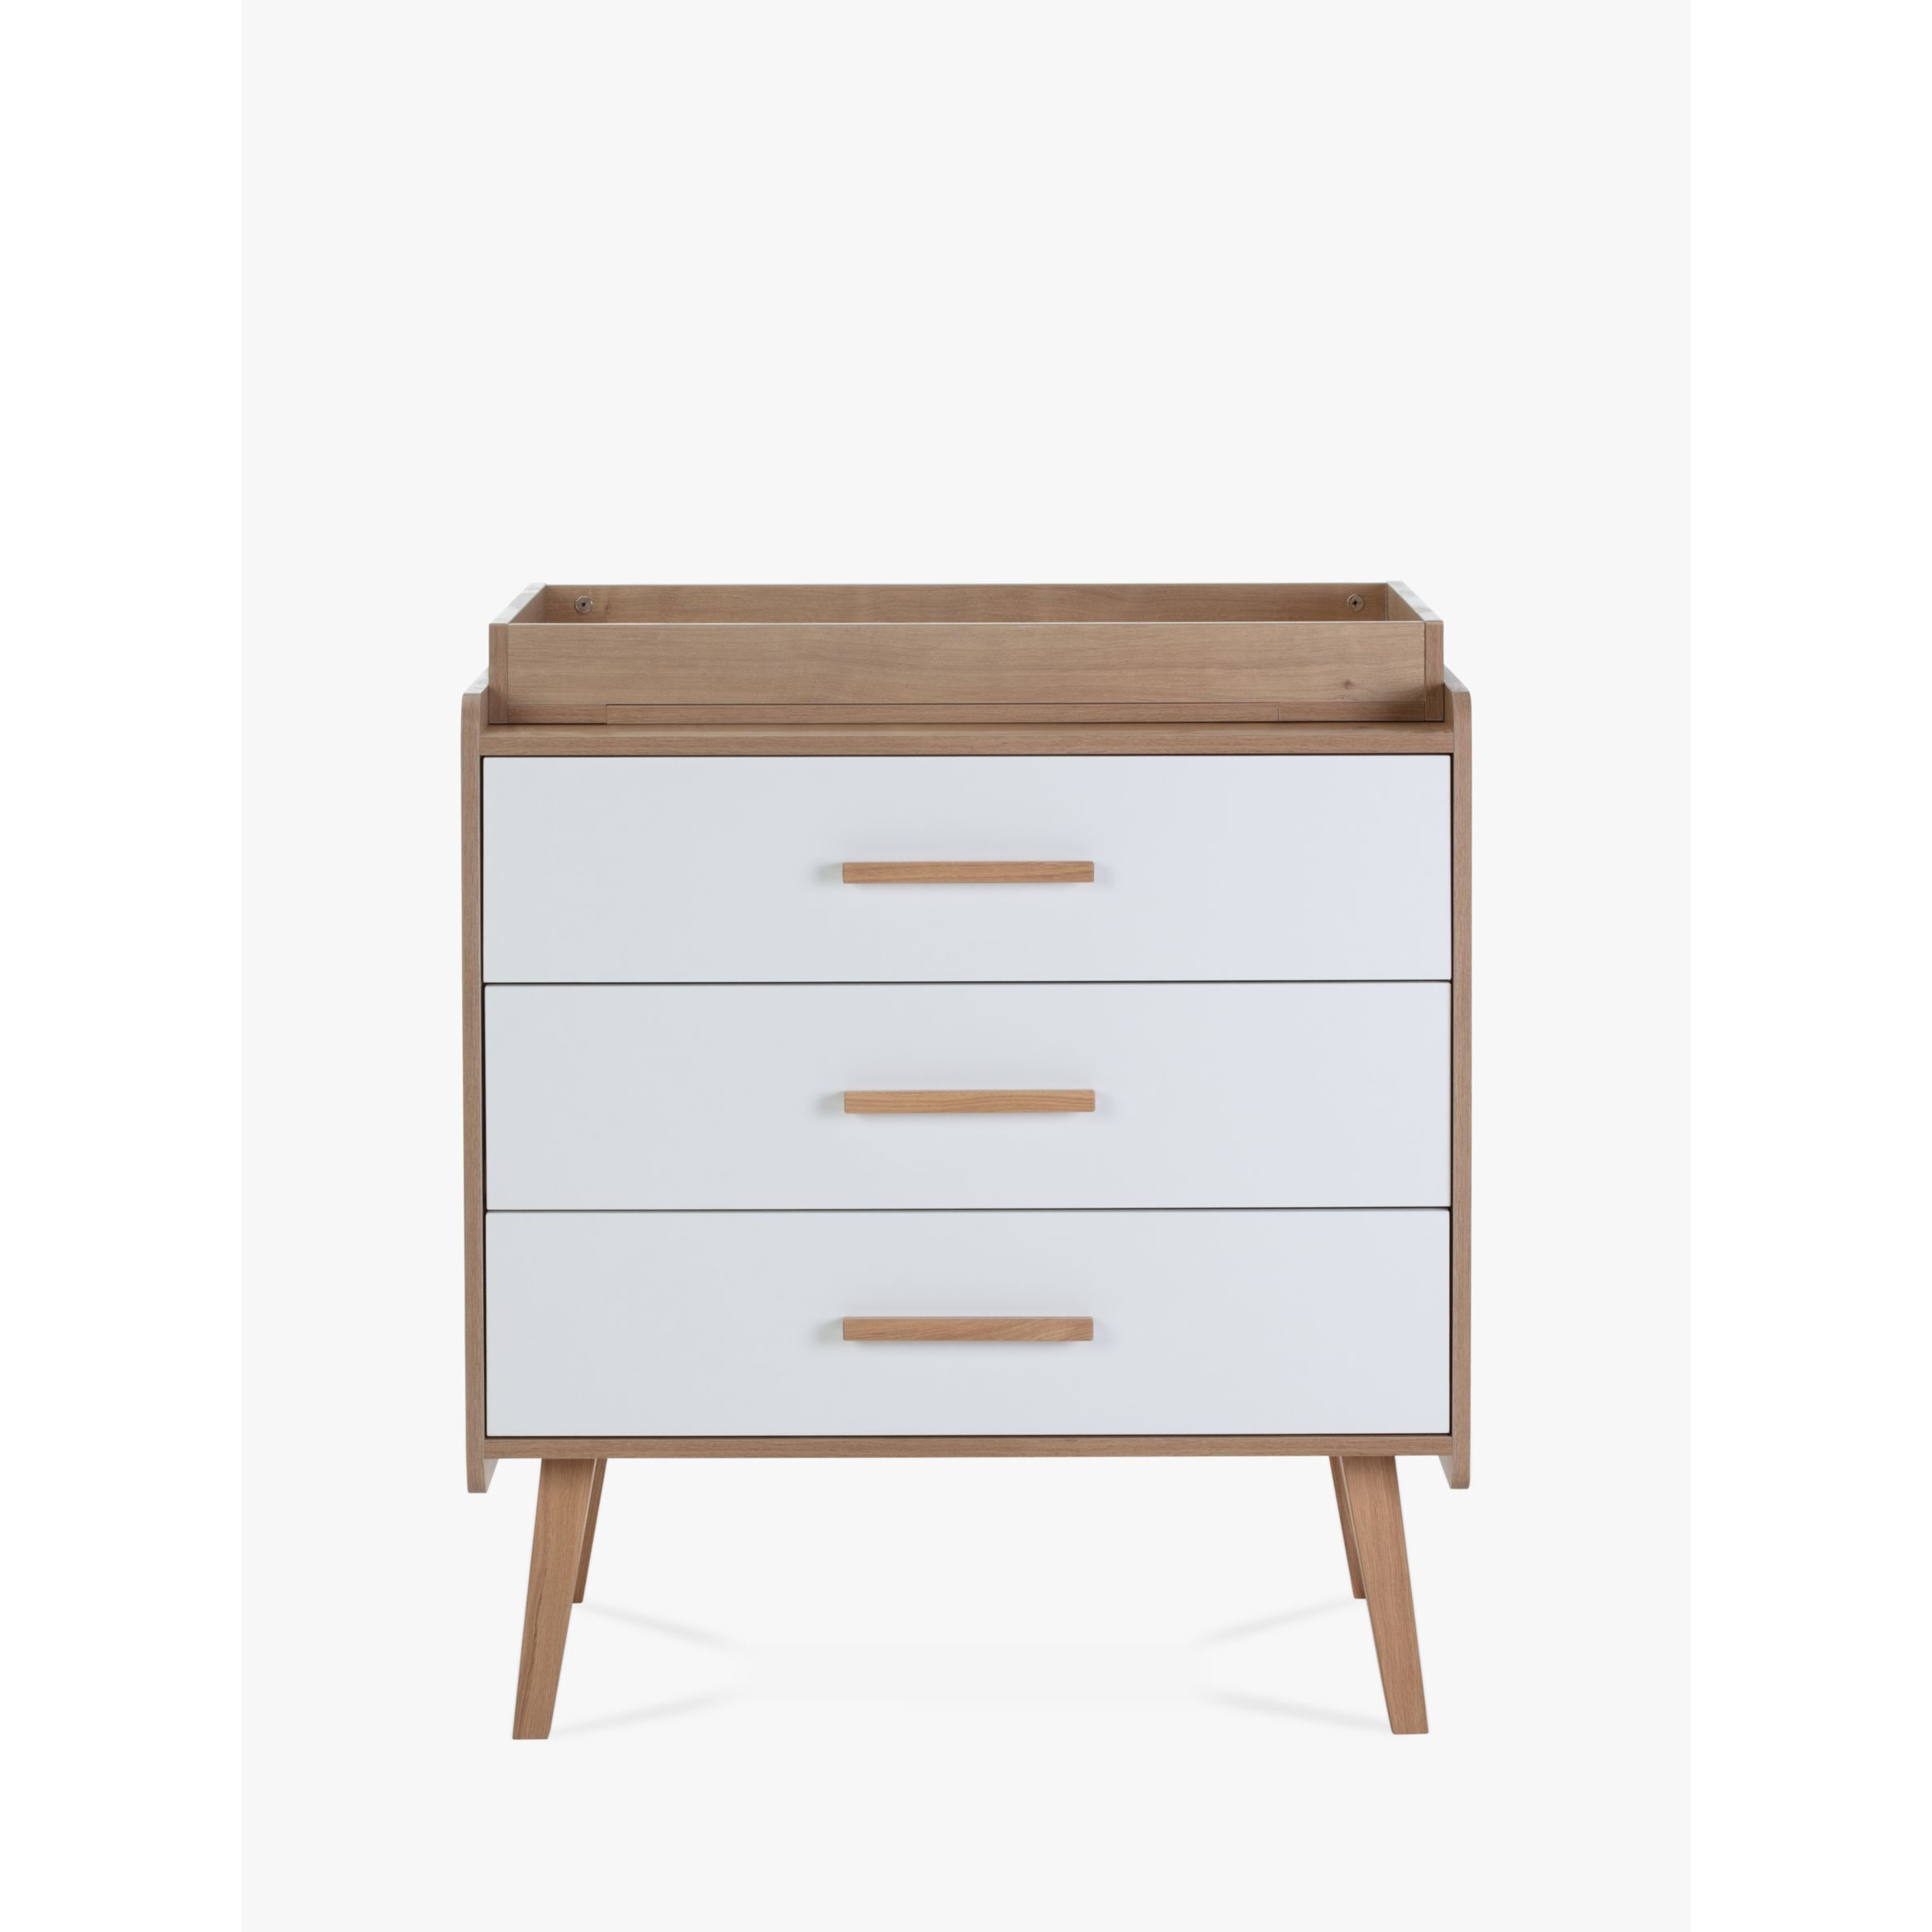 Silver Cross West Port 3 Drawer Dresser Changing Table, Natural/White - image 1